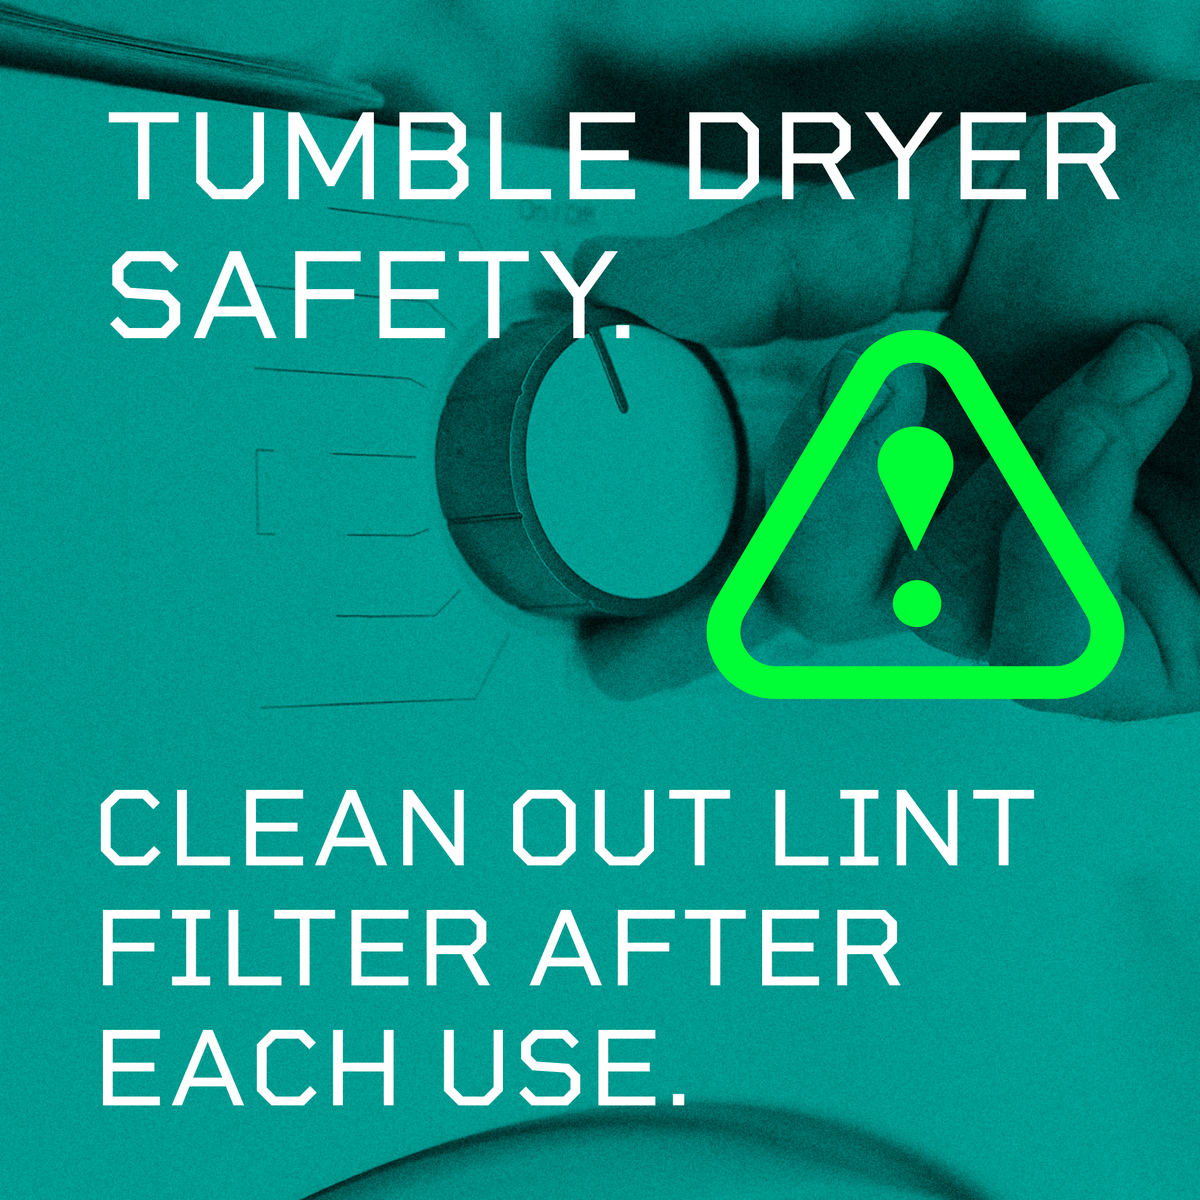 🧹Spring cleaning season is here. Clean out lint and fluff from the lint filter after each use to prevent potential fire hazards. Check for scorch marks, loose wires, and refer to manufacturer instructions for additional tips. Full list of safety advice: ow.ly/Qv5v50RthpX